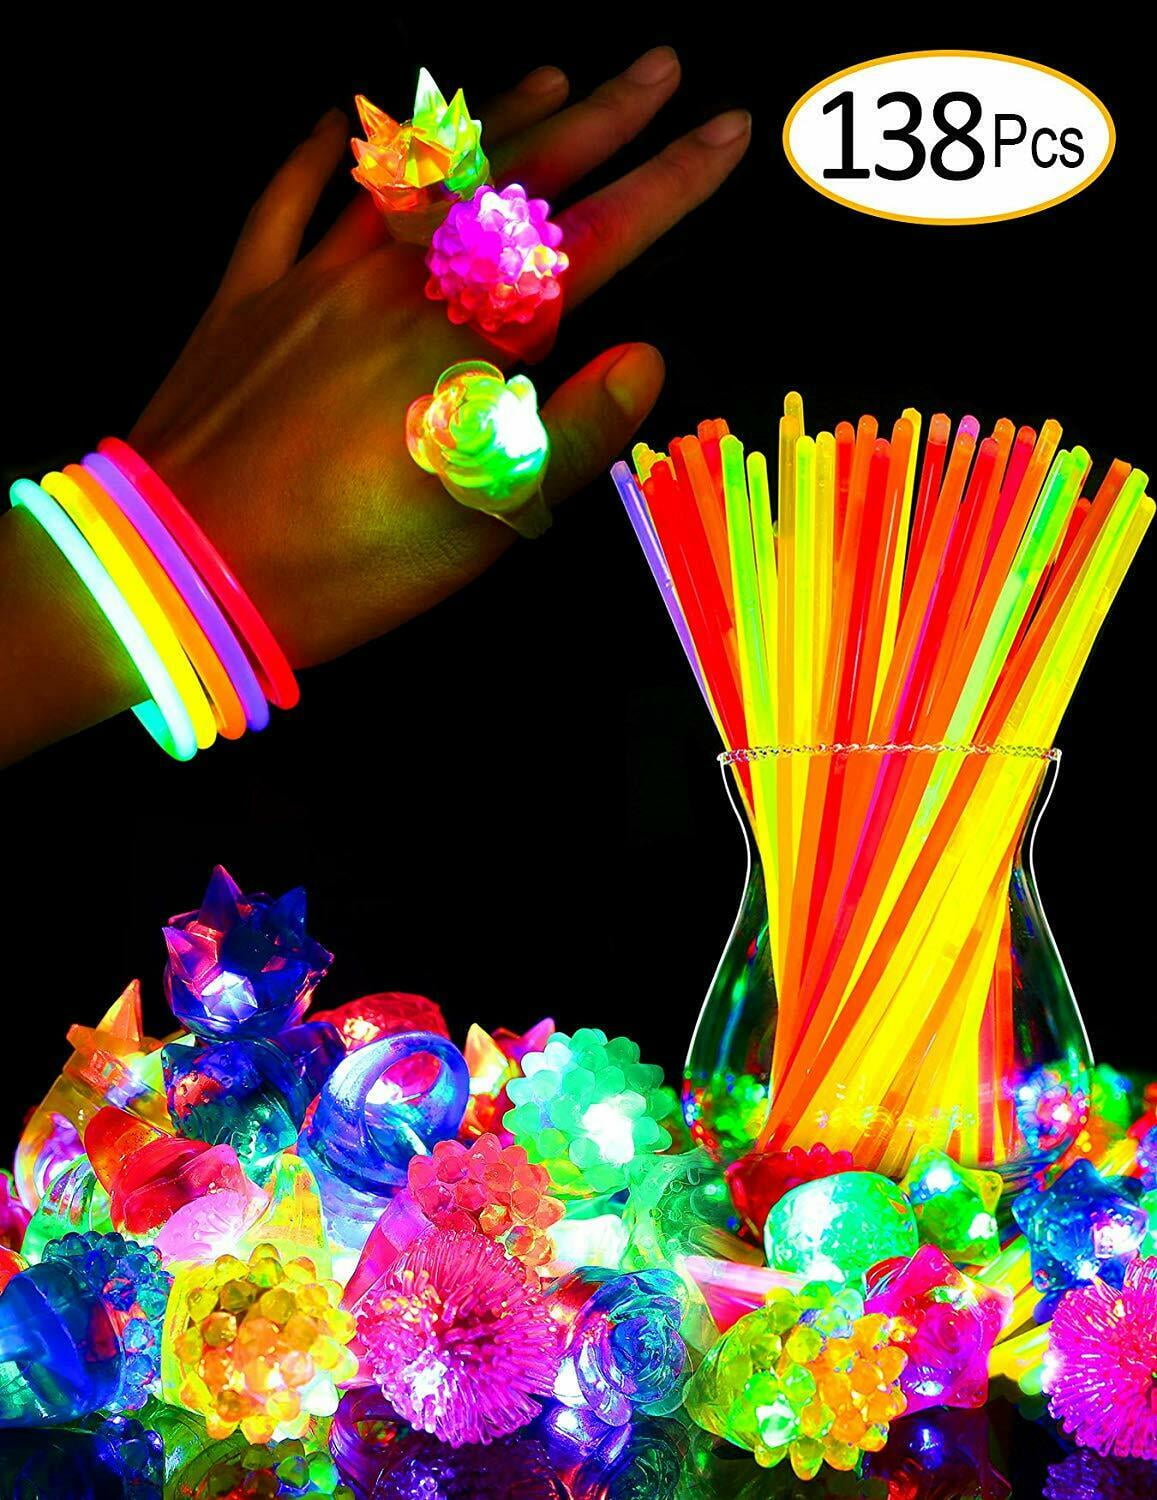 30 pc GLOW IN THE DARK LIGHT UP GLOWING MOTION PARTY CELEBRATION DRINKING STRAWS 